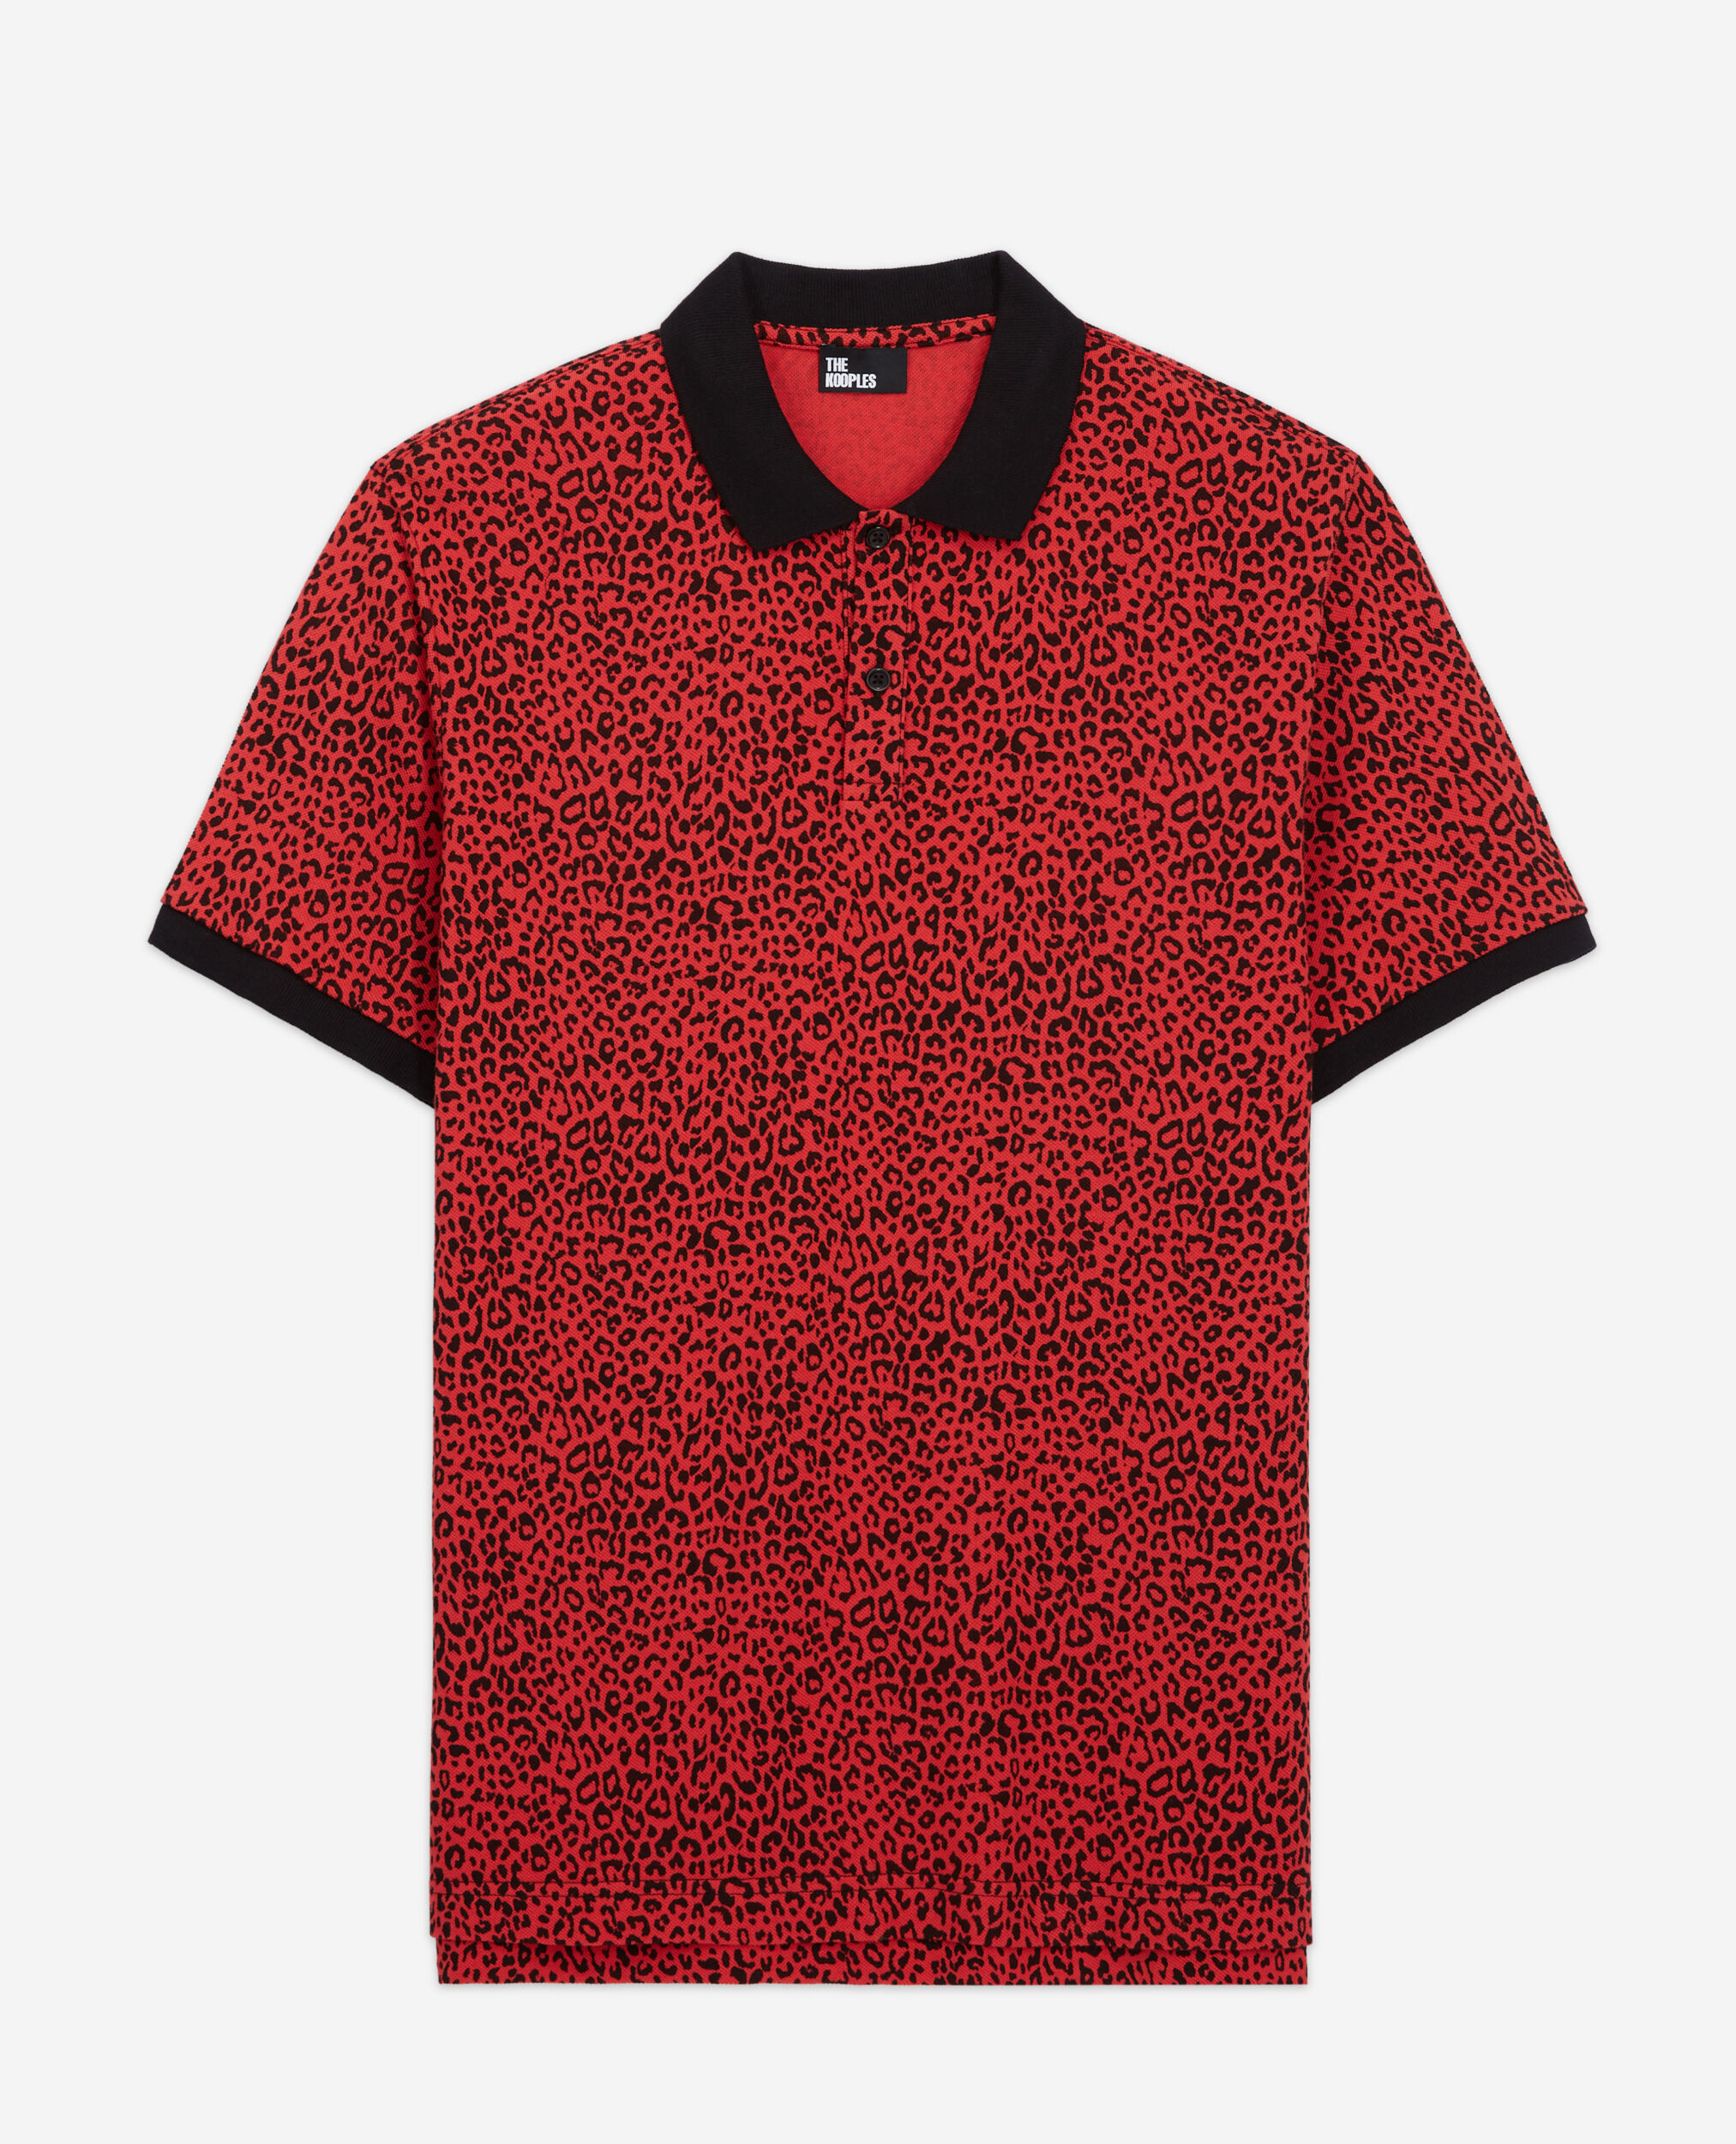 Rotes Poloshirt mit Leopardenmuster, DARK RED, hi-res image number null